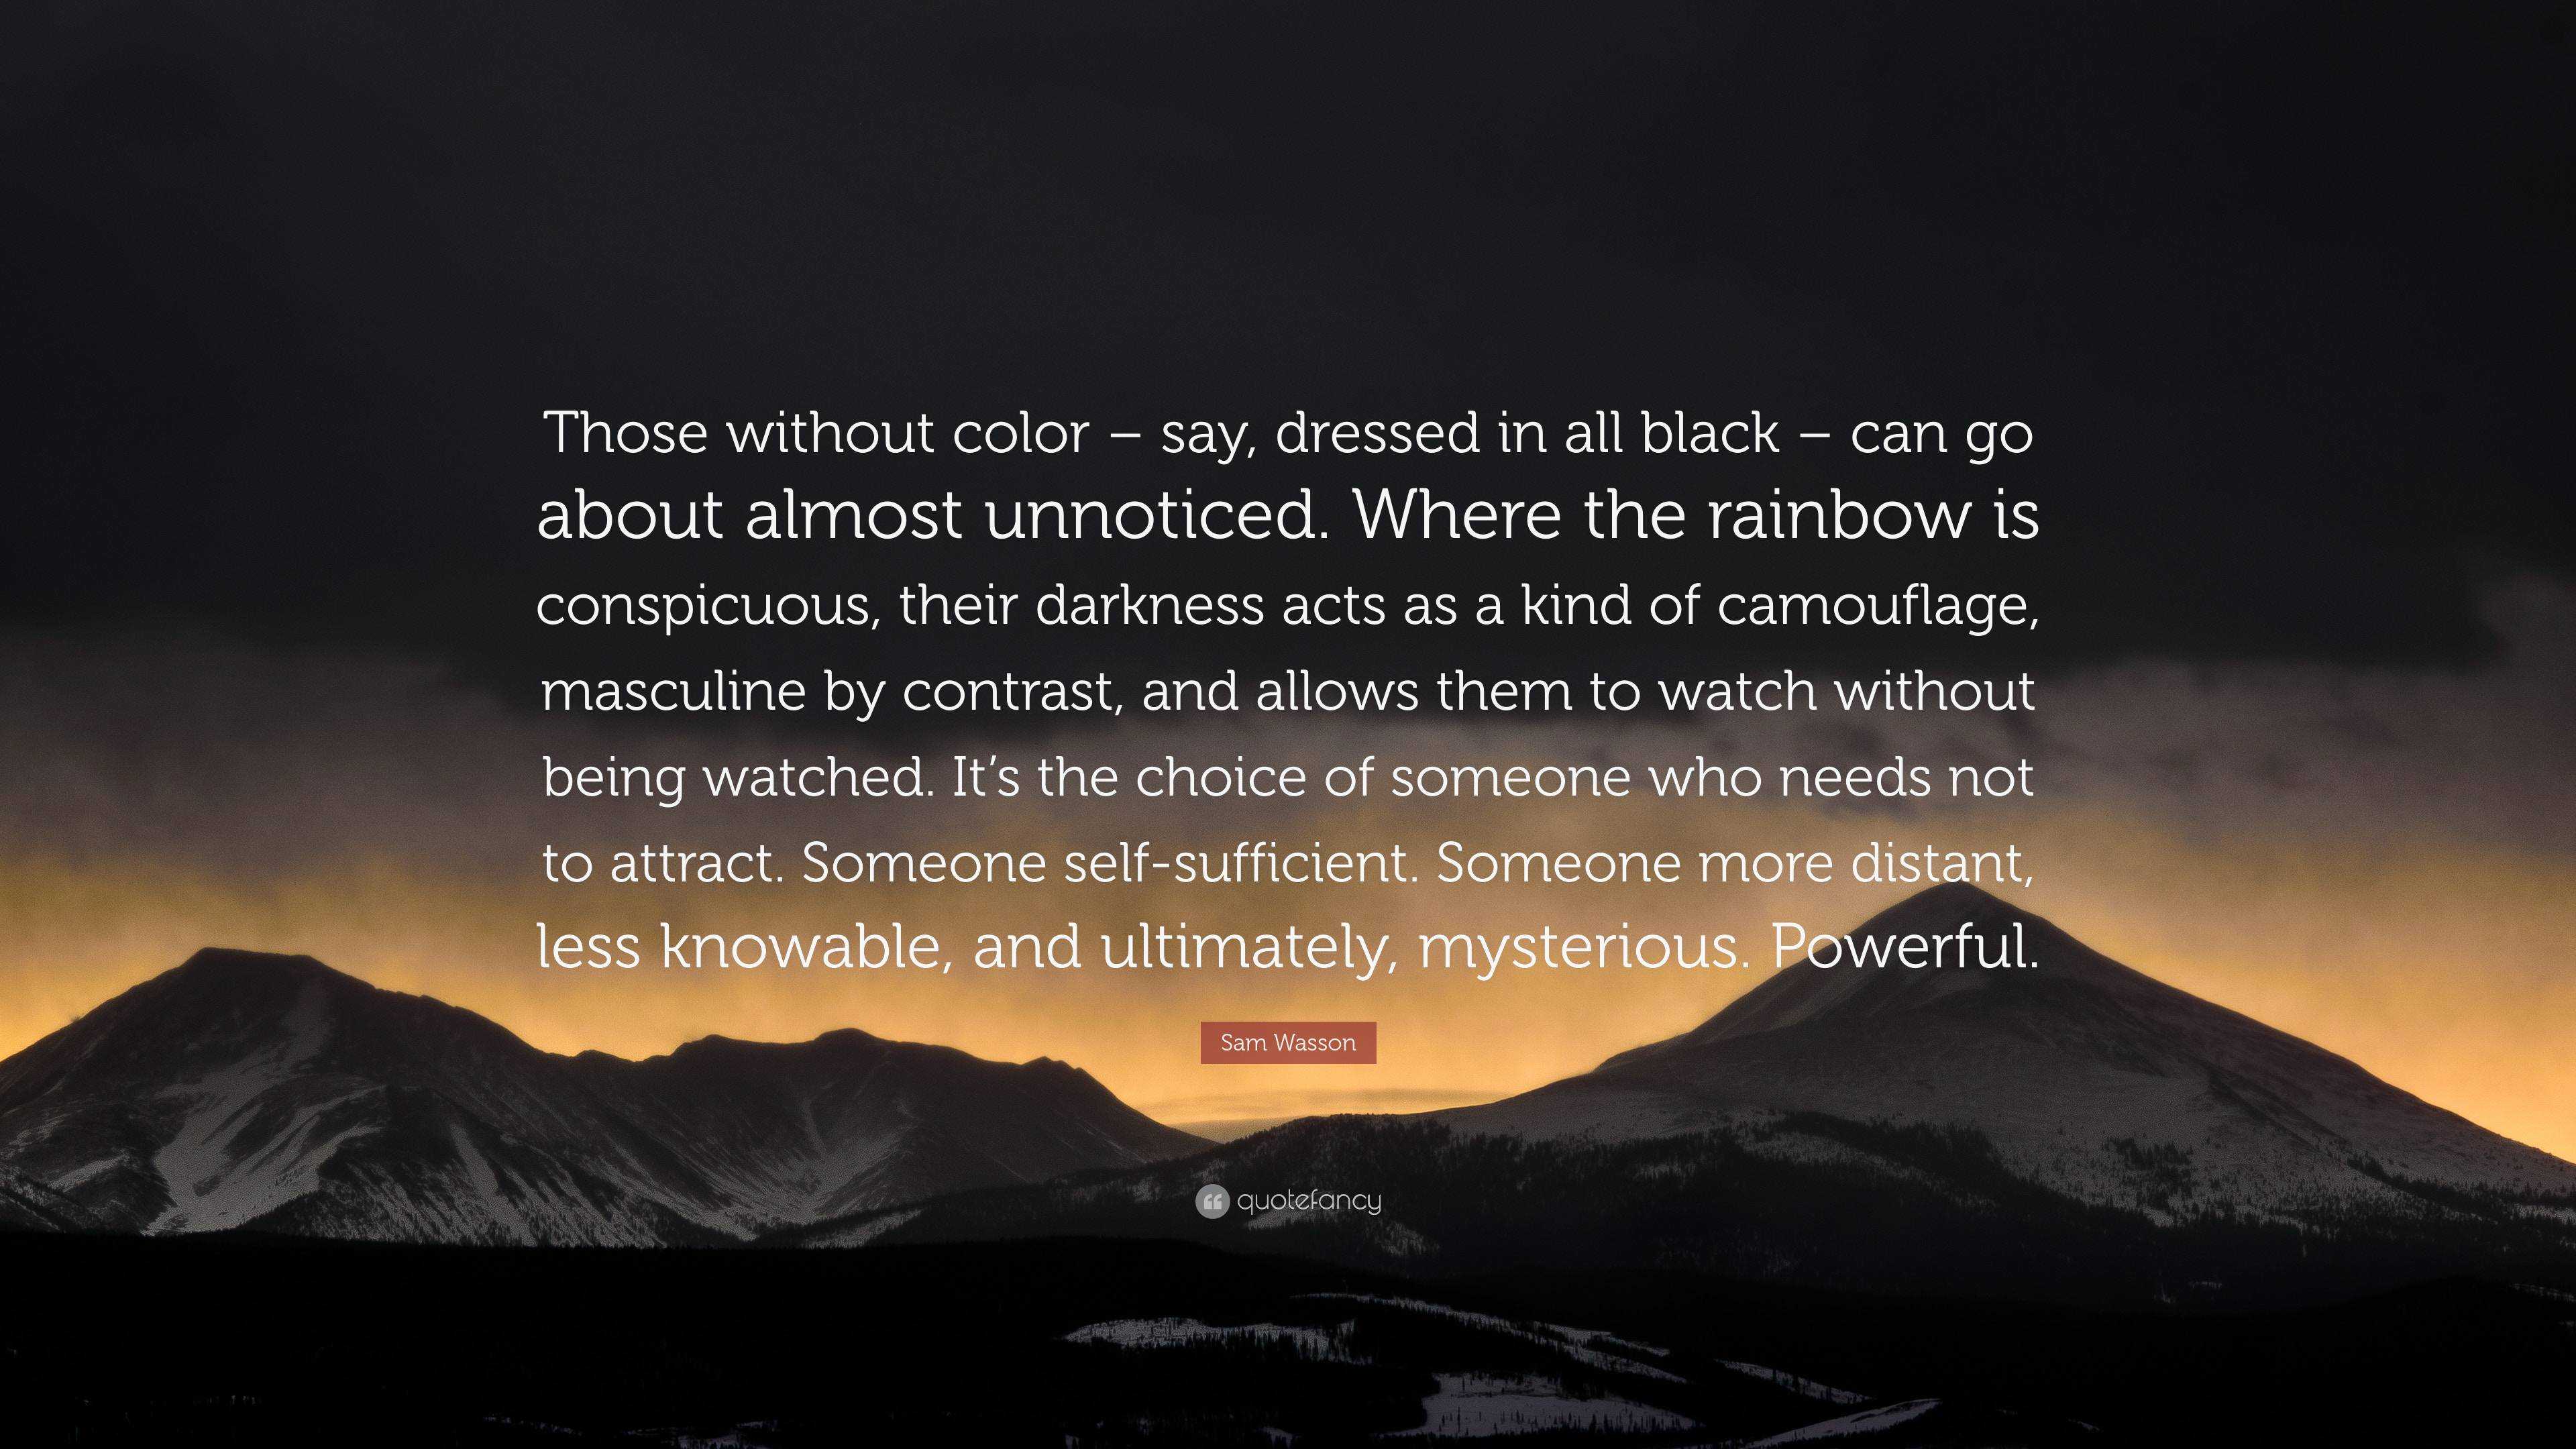 Sam Wasson Quote: “Those without color – say, dressed in all black – can go  about almost unnoticed. Where the rainbow is conspicuous, their”